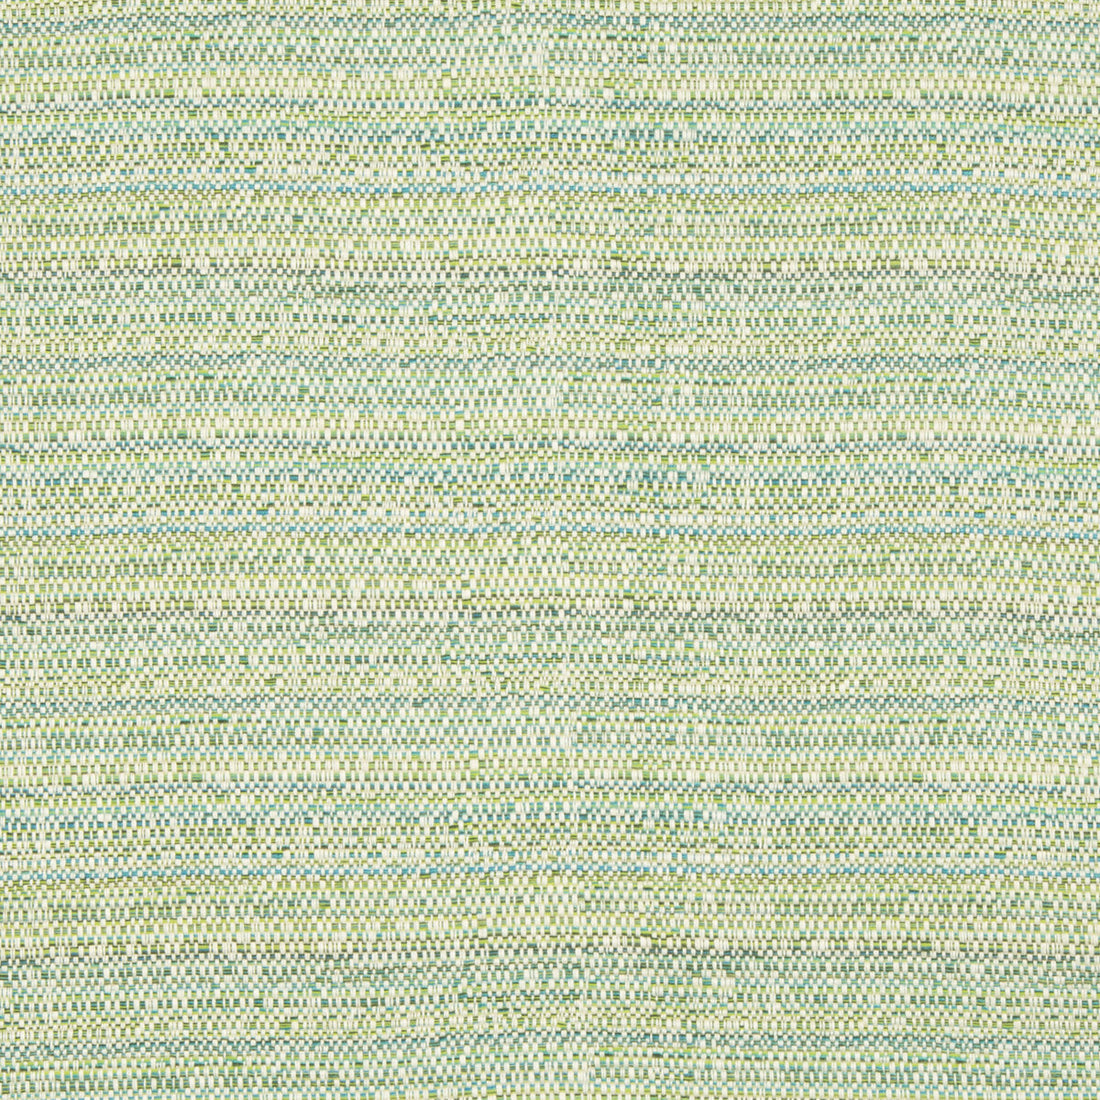 Melanger fabric in seaglass color - pattern 31695.3.0 - by Kravet Couture in the Echo Indoor Outdoor Ibiza collection